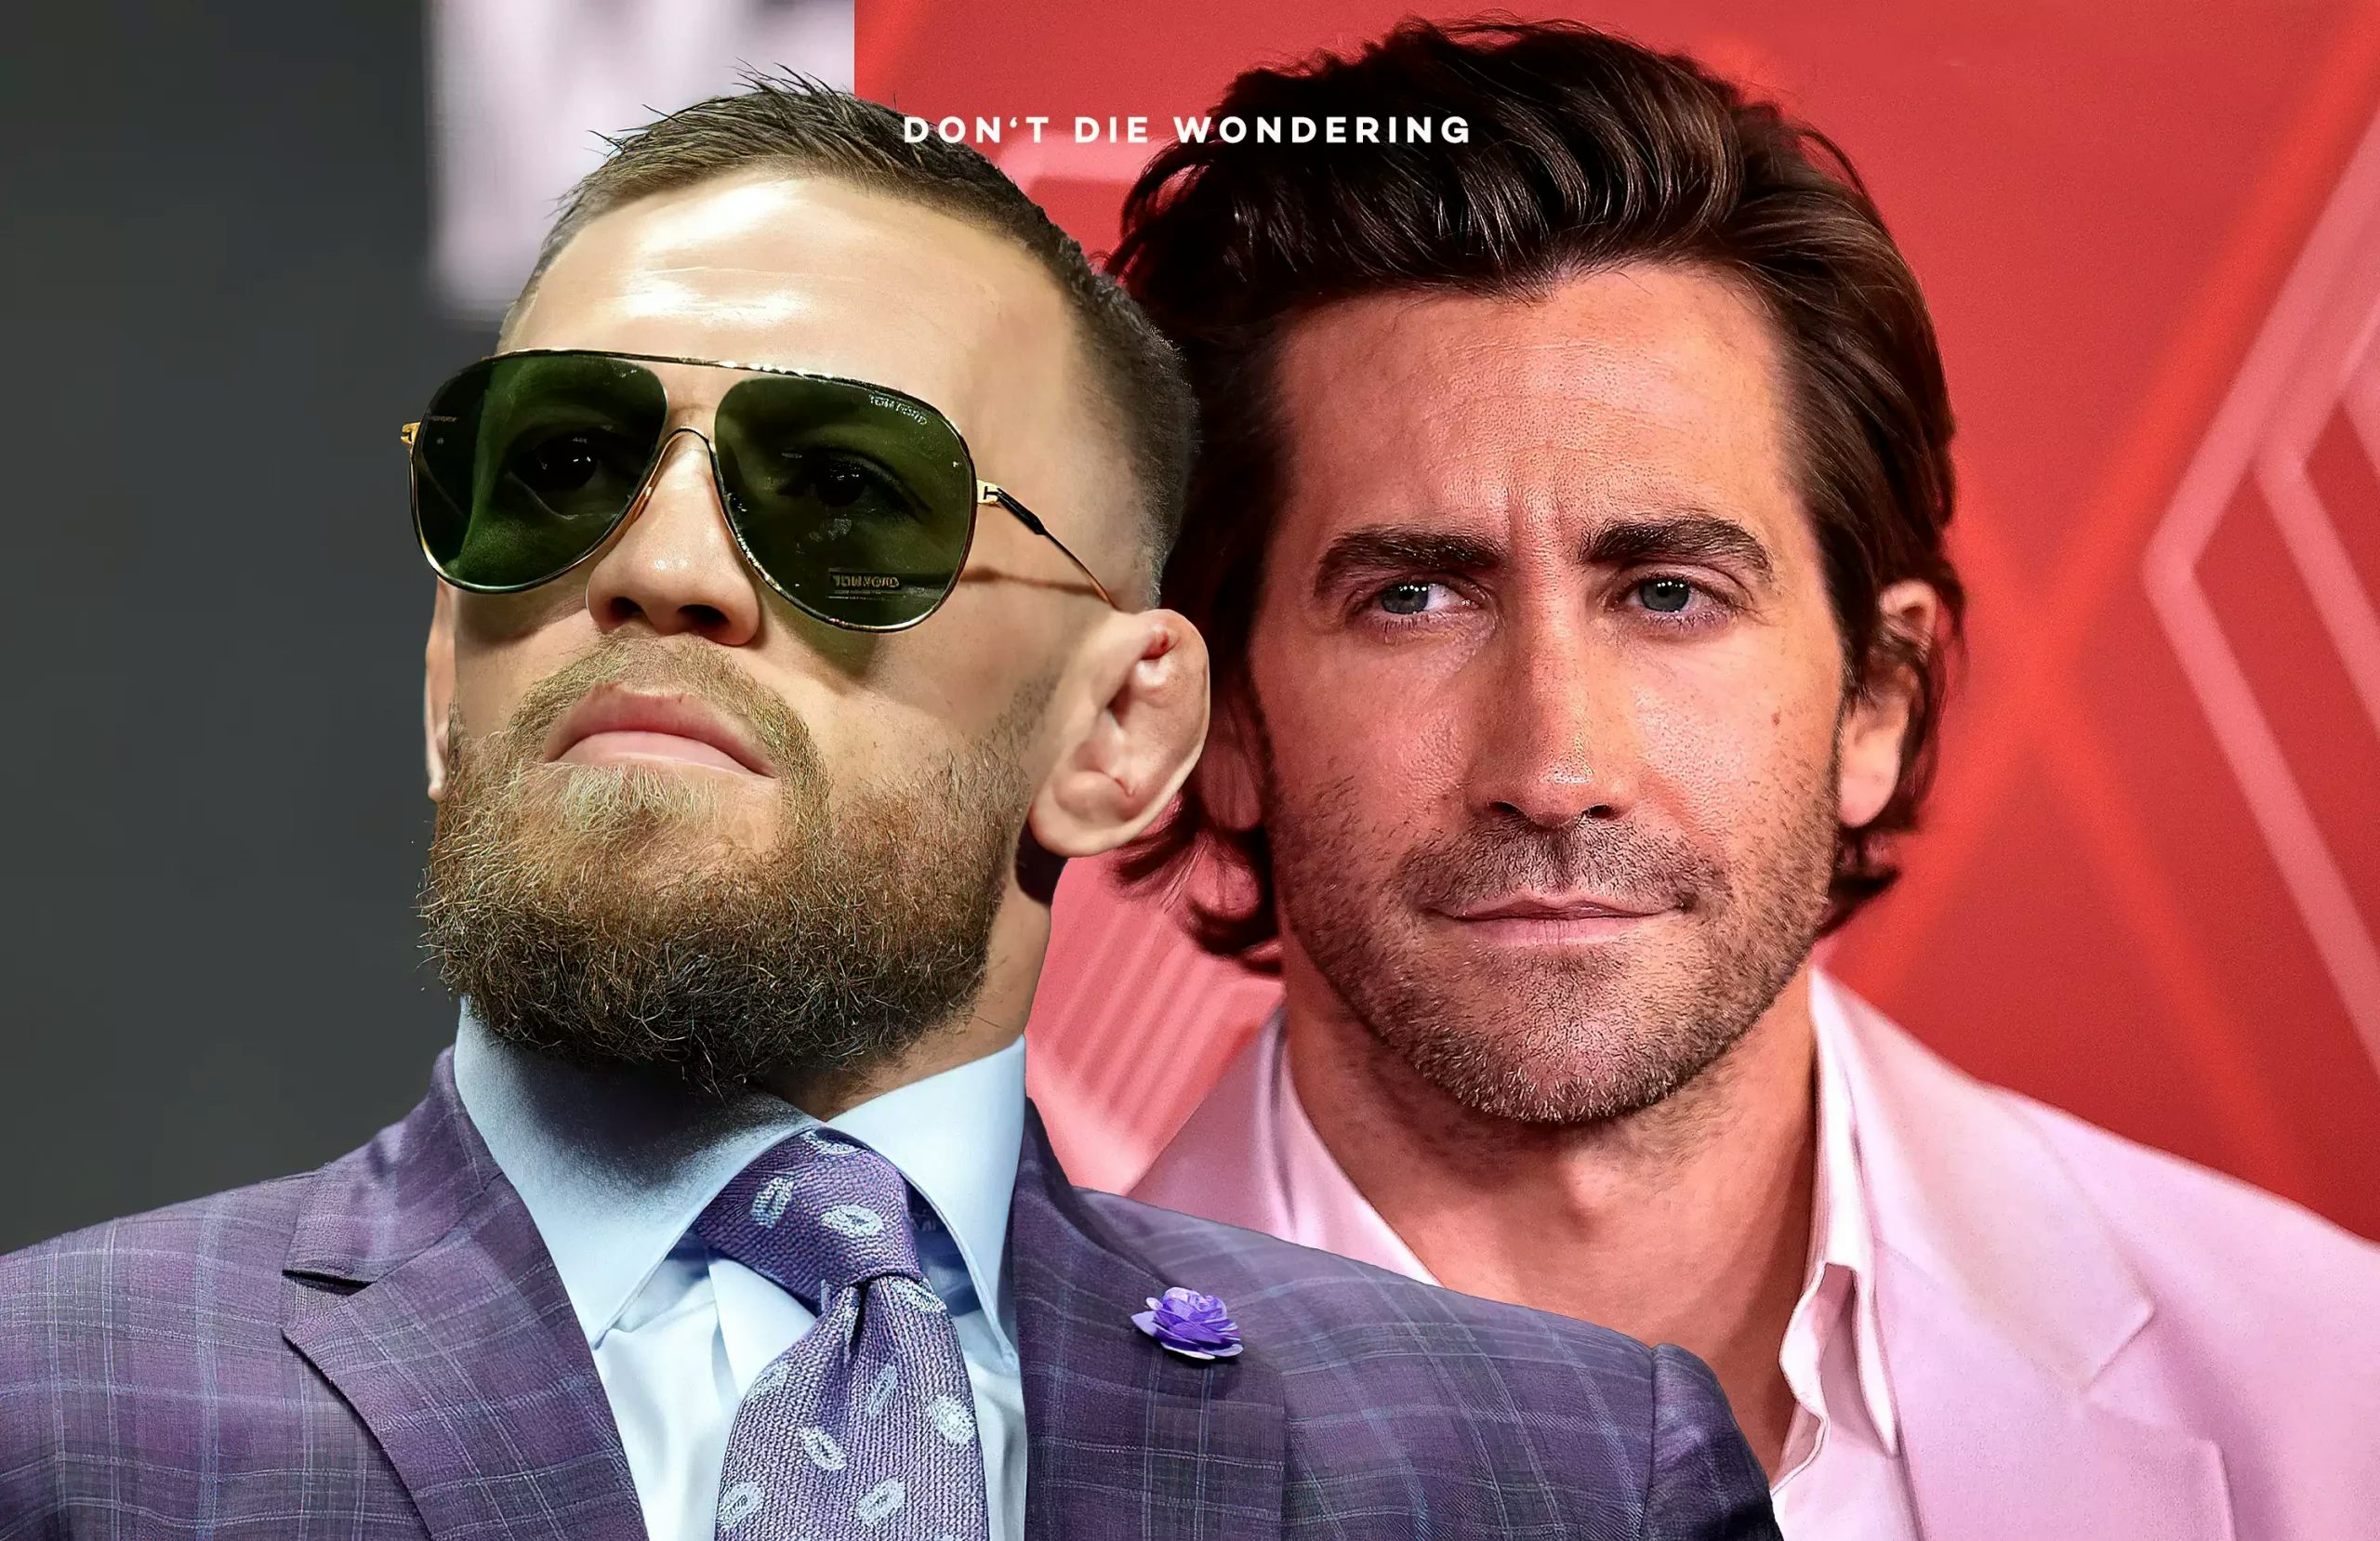 Conor McGregor to make Acting Debut in Jake Gyllenhaal led Road House Remake